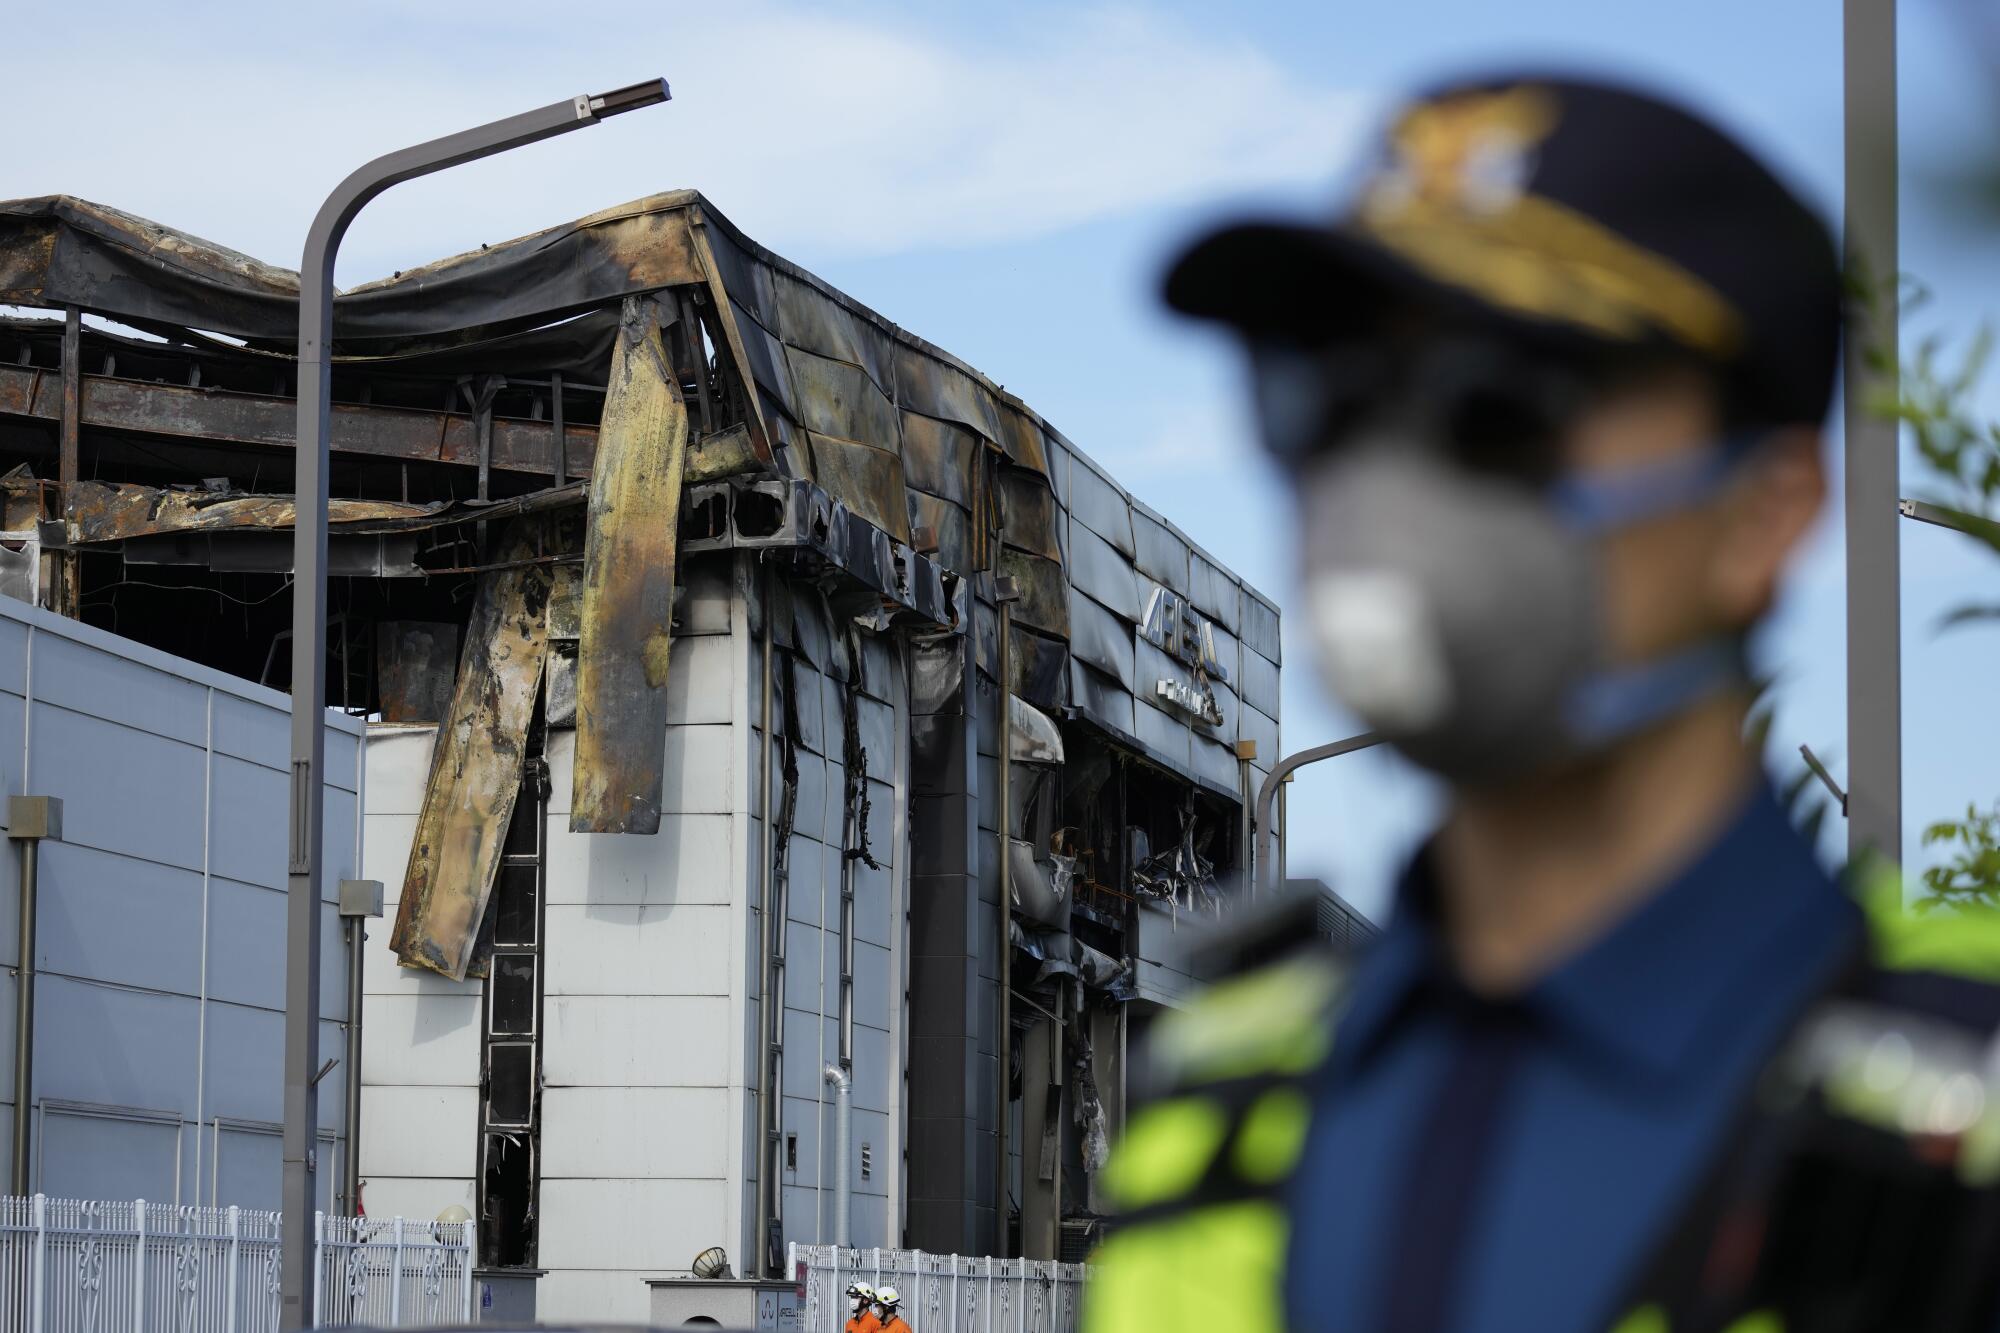 A police officer, out of focus in the front of the frame, stands near a scorched building.